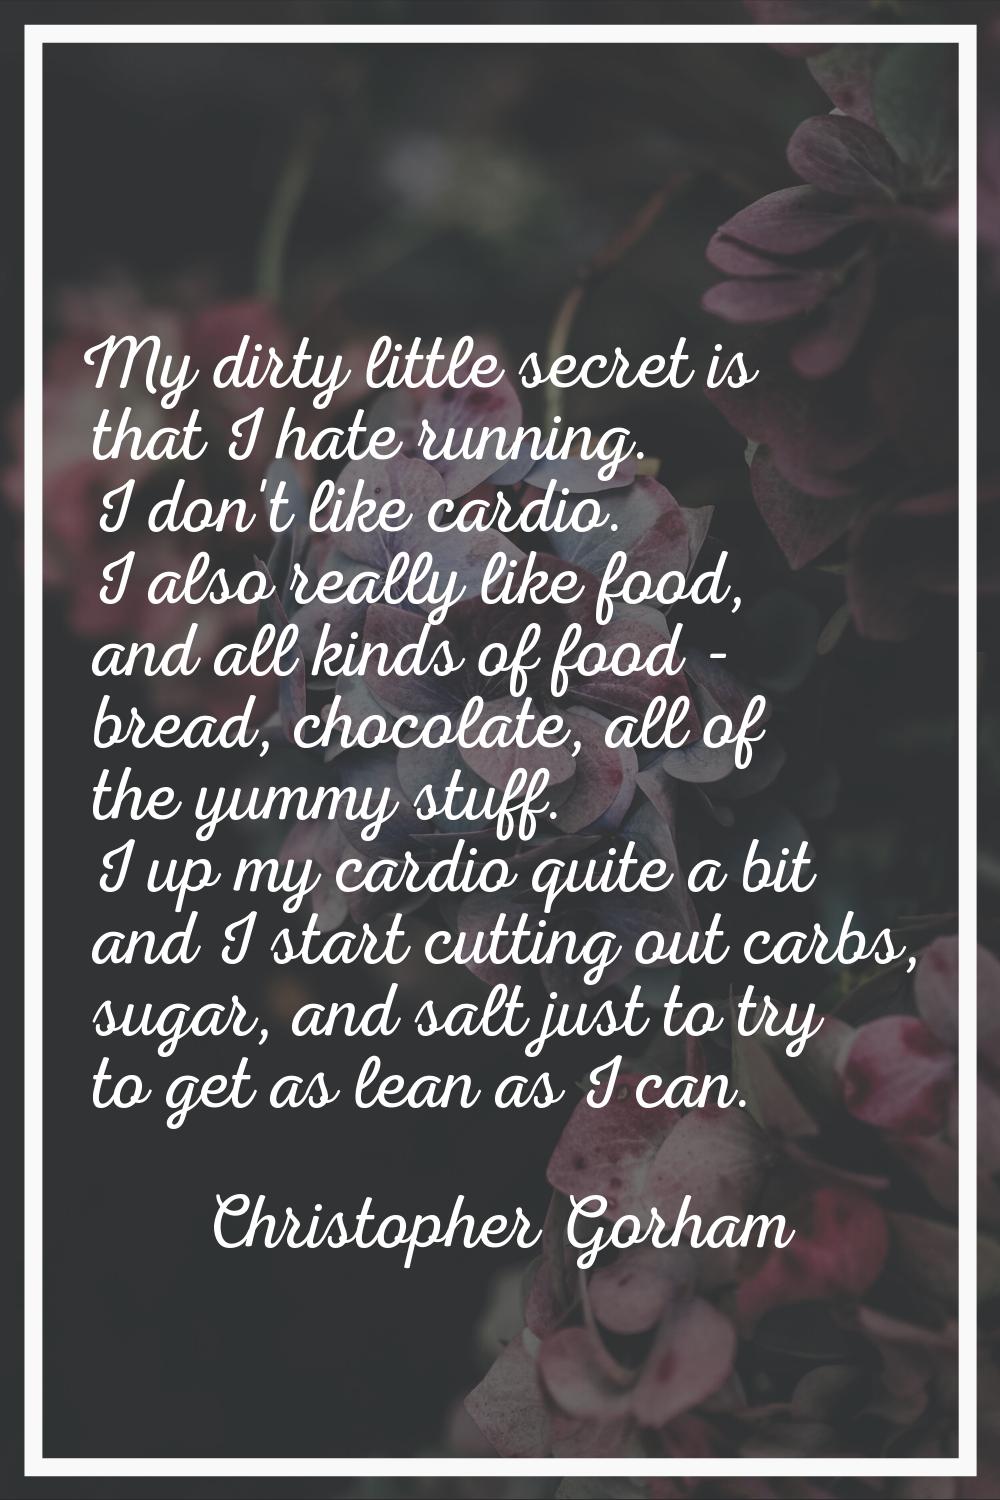 My dirty little secret is that I hate running. I don't like cardio. I also really like food, and al